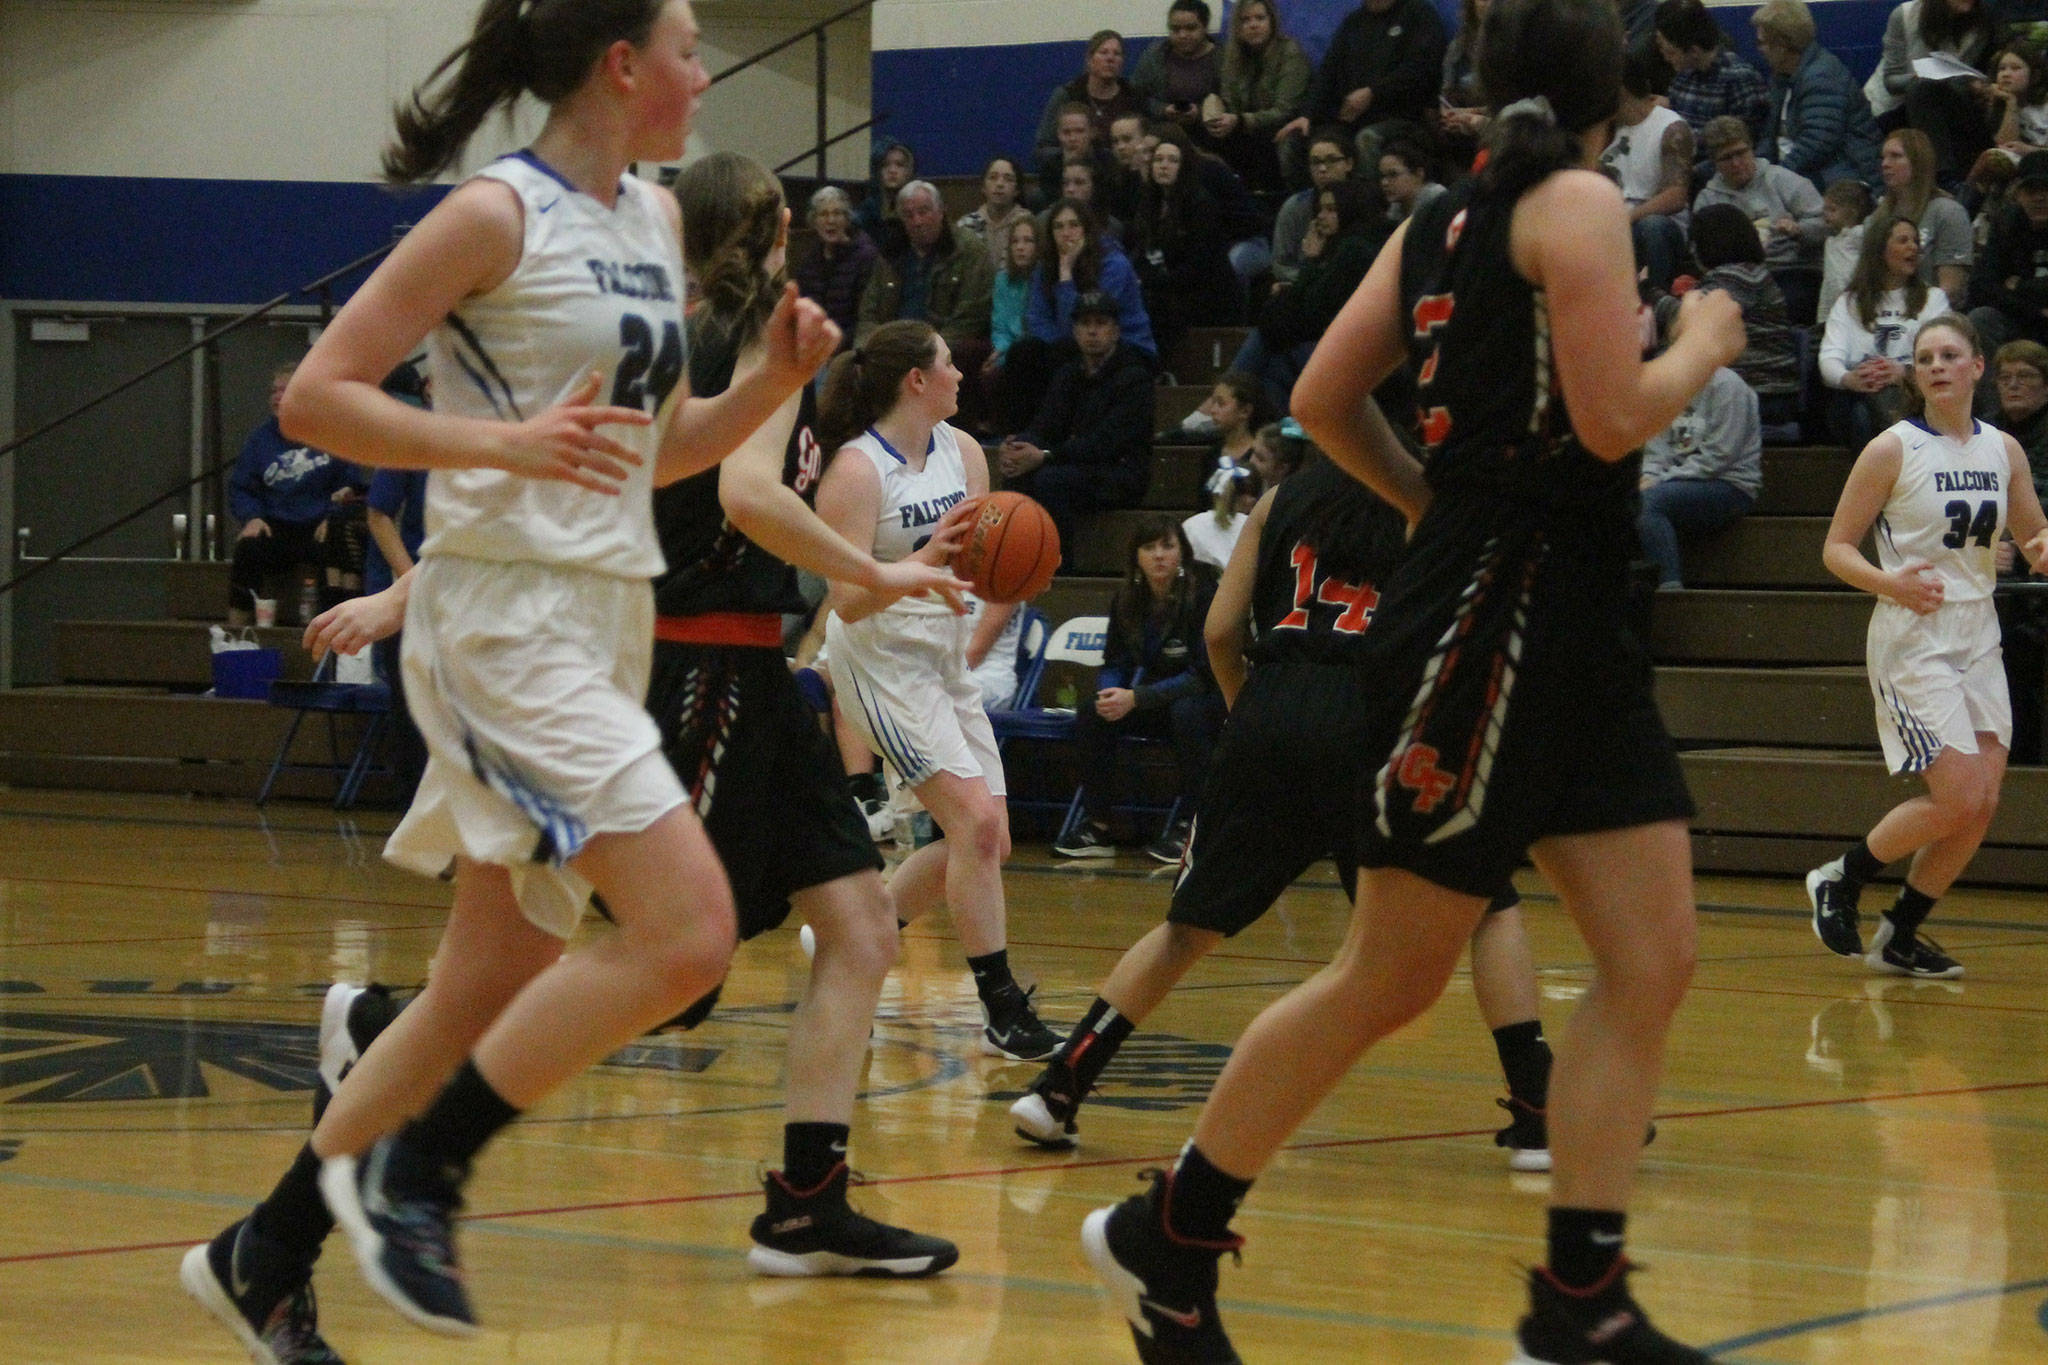 Kayla Knauer, center, leads South Whidbey on a break against Granite Falls Friday. (Photo by Jim Waller/South Whidbey Record)